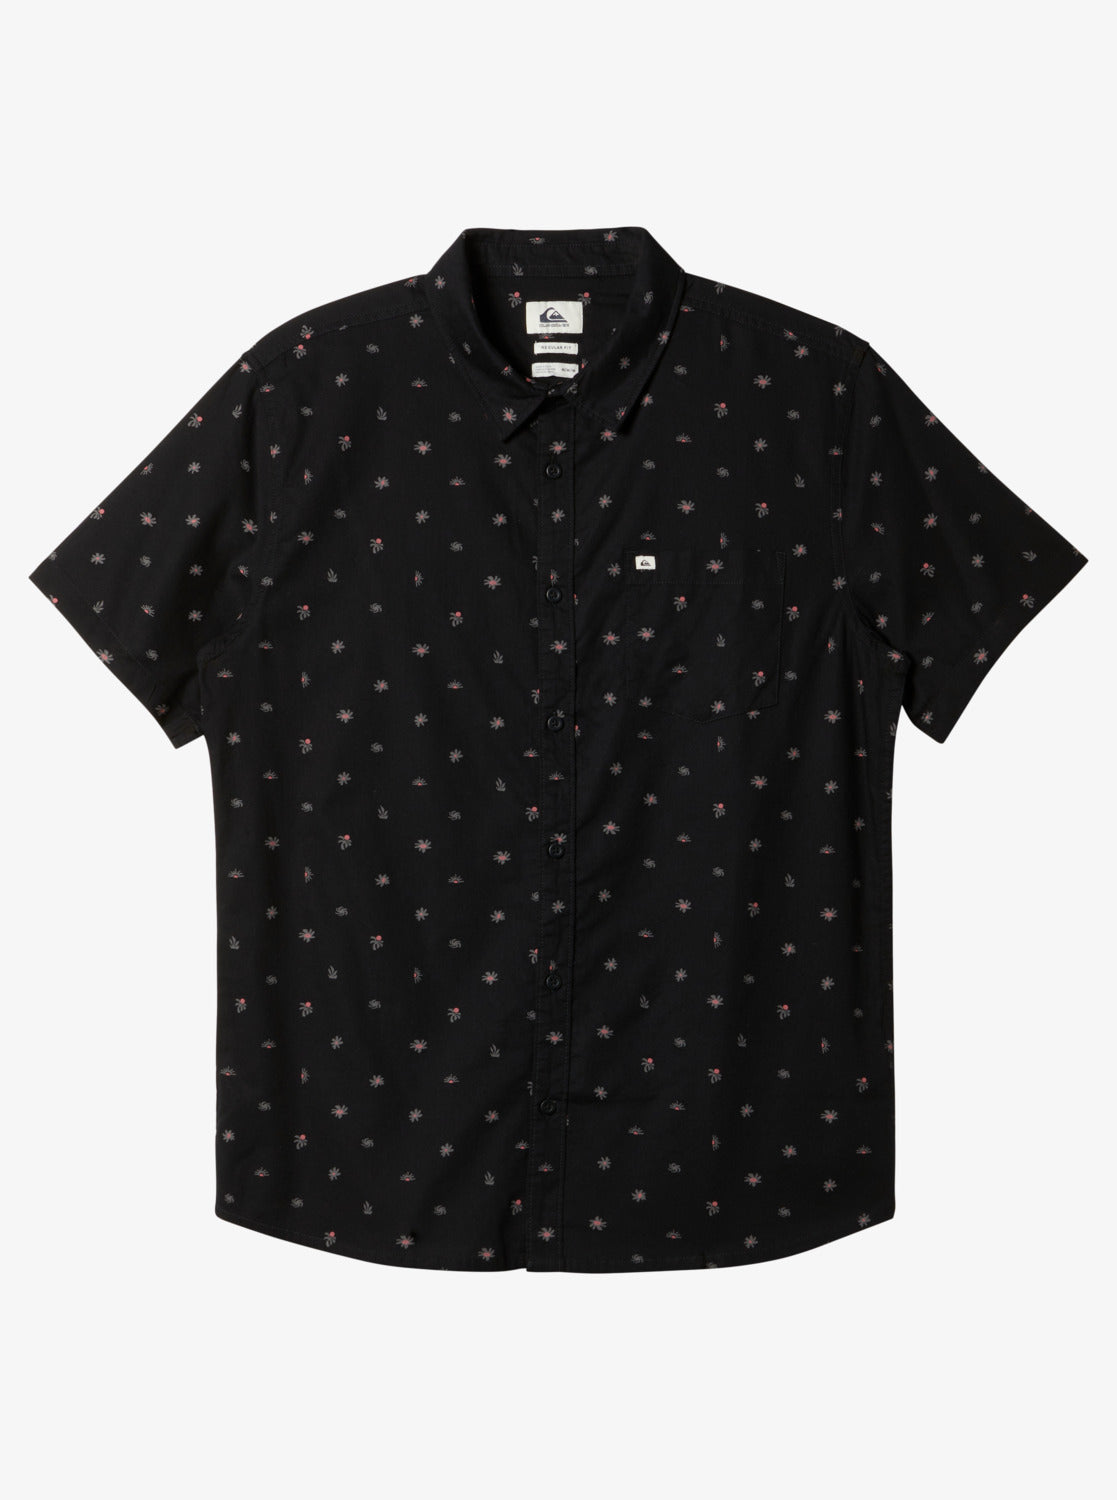 Quiksilver Minimo SS Shirt front flat lay image in black